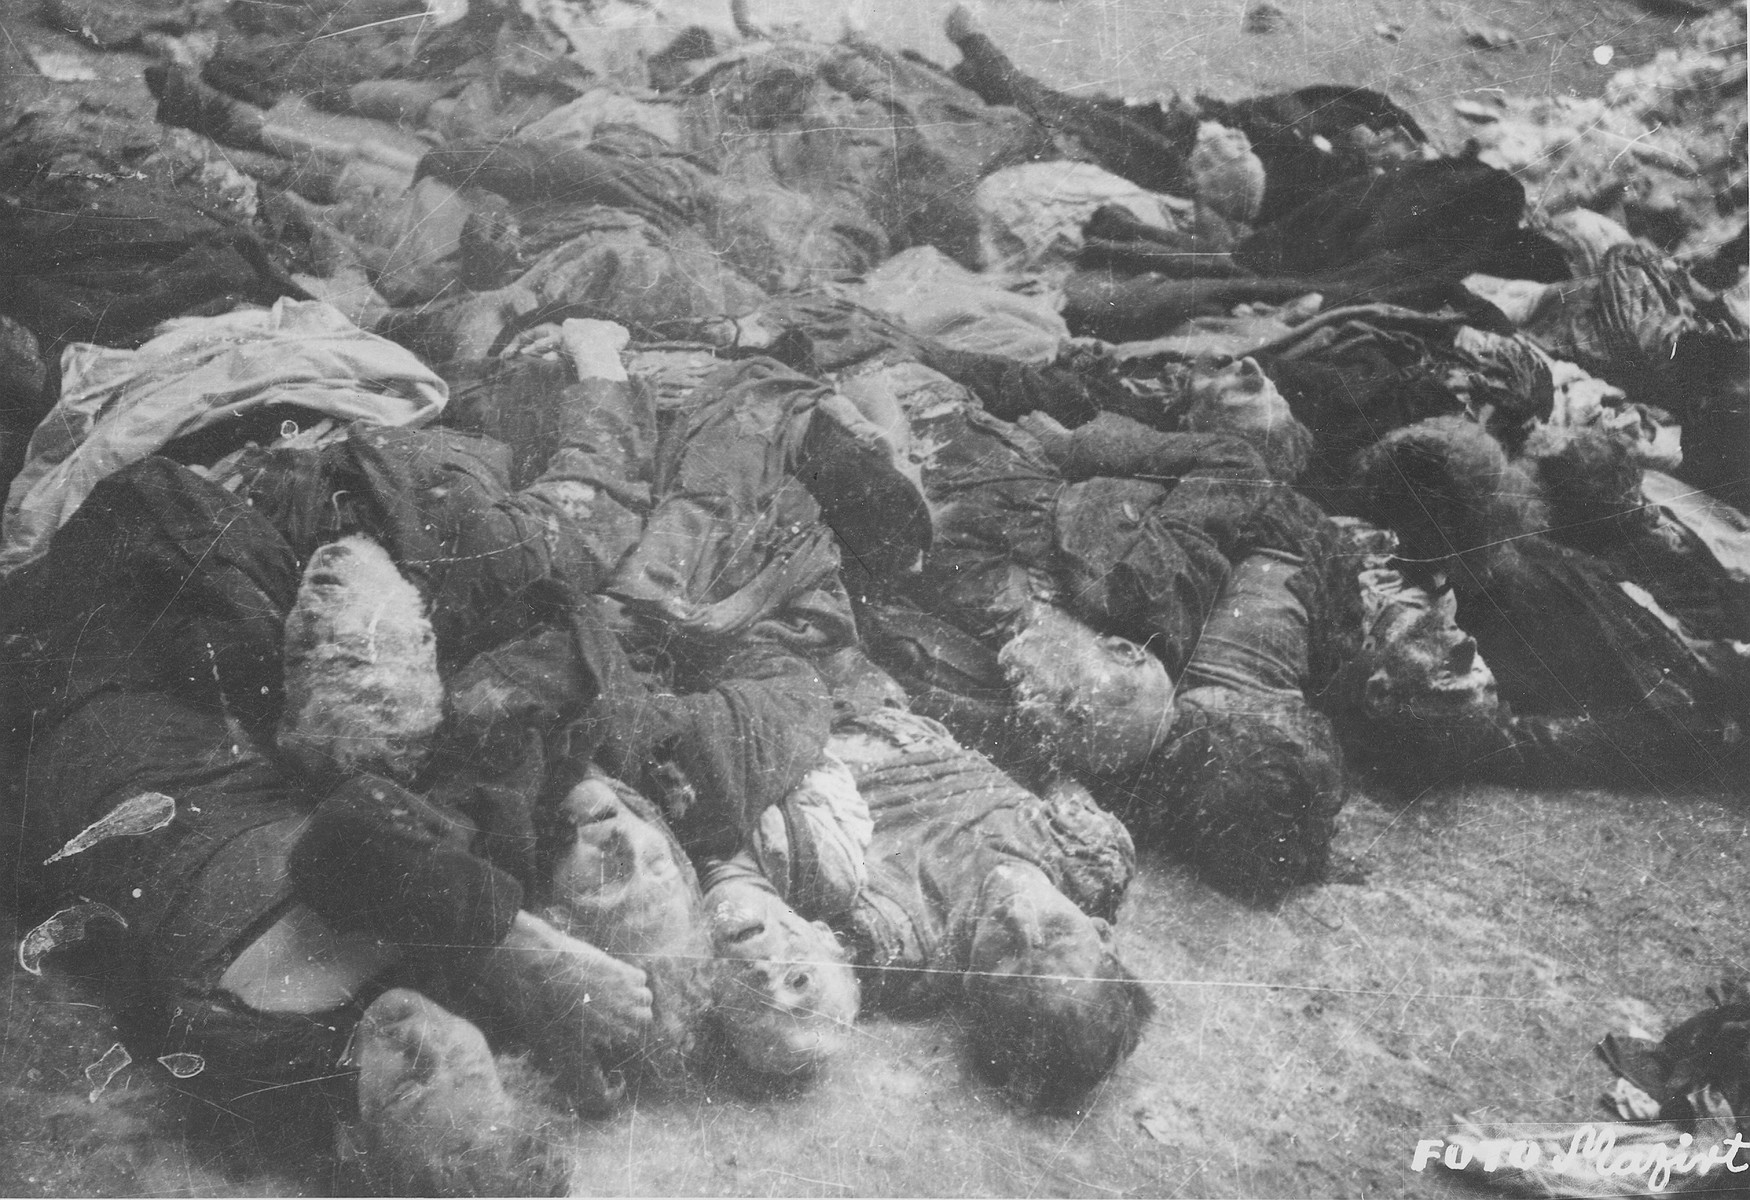 Corpses of Jews in the courtyard of the Dohany Street Synagogue.

During the last few months of the war in Hungary, the Nyilas (Arrow Cross) exploited the anarchic conditions in the areas still under their control to continue their excesses against the Jews.  This was particularly true in Budapest, despite the fact that the Soviet army had completely encircled the city by December 27, 1944.  The reign of terror that had begun with Szalaszi's assumption of power on October 15, 1944, went almost completely unchecked after the beginning of the Soviet siege on December 9.  Gangs of armed Nyilas--mostly teenagers--roamed the city hunting for Jews in hiding.  They searched them out in hospitals, shelters, homes outside the ghetto, in the International Ghetto, and in the large ghetto.  After robbing the Jews of their remaining valuables, the Nyilas shot them on the spot or marched them to the banks of the Danube, where they shot them, and threw their bodies into the river.  A large number of Jews who were murdered in the ghetto were buried in mass graves in the courtyard of the Dohany Street Synagogue.

The most horrific of these attacks occurred on the Pest side of the capital, at the two Jewish hospitals located on Maros and Varosmajor streets.  The Maros Street hospital, which had operated under the protection of the International Red Cross during the German occupation, was attacked on January 11, 1945.  After the initial melee, during which Nyilas gang members wantonly destroyed hospital equipment, threw patients out of their beds and trampled them, and murdered staff members, survivors were ordered to dig a mass grave, remove and bury the bodies.  They were then shot and buried in the grave themselves.  Only one nurse survived of the 92 people that were in the hospital at the time.  Three days later, on January 14, the hospital on Varosmajor Street was attacked, resulting in the deaths of 150 patients and medical staff.  These manhunts and massacres continued unabated until the liberation of Budapest in April.  [R. Braham, "The Politics of Genocide," vol. 2: 995-1007]